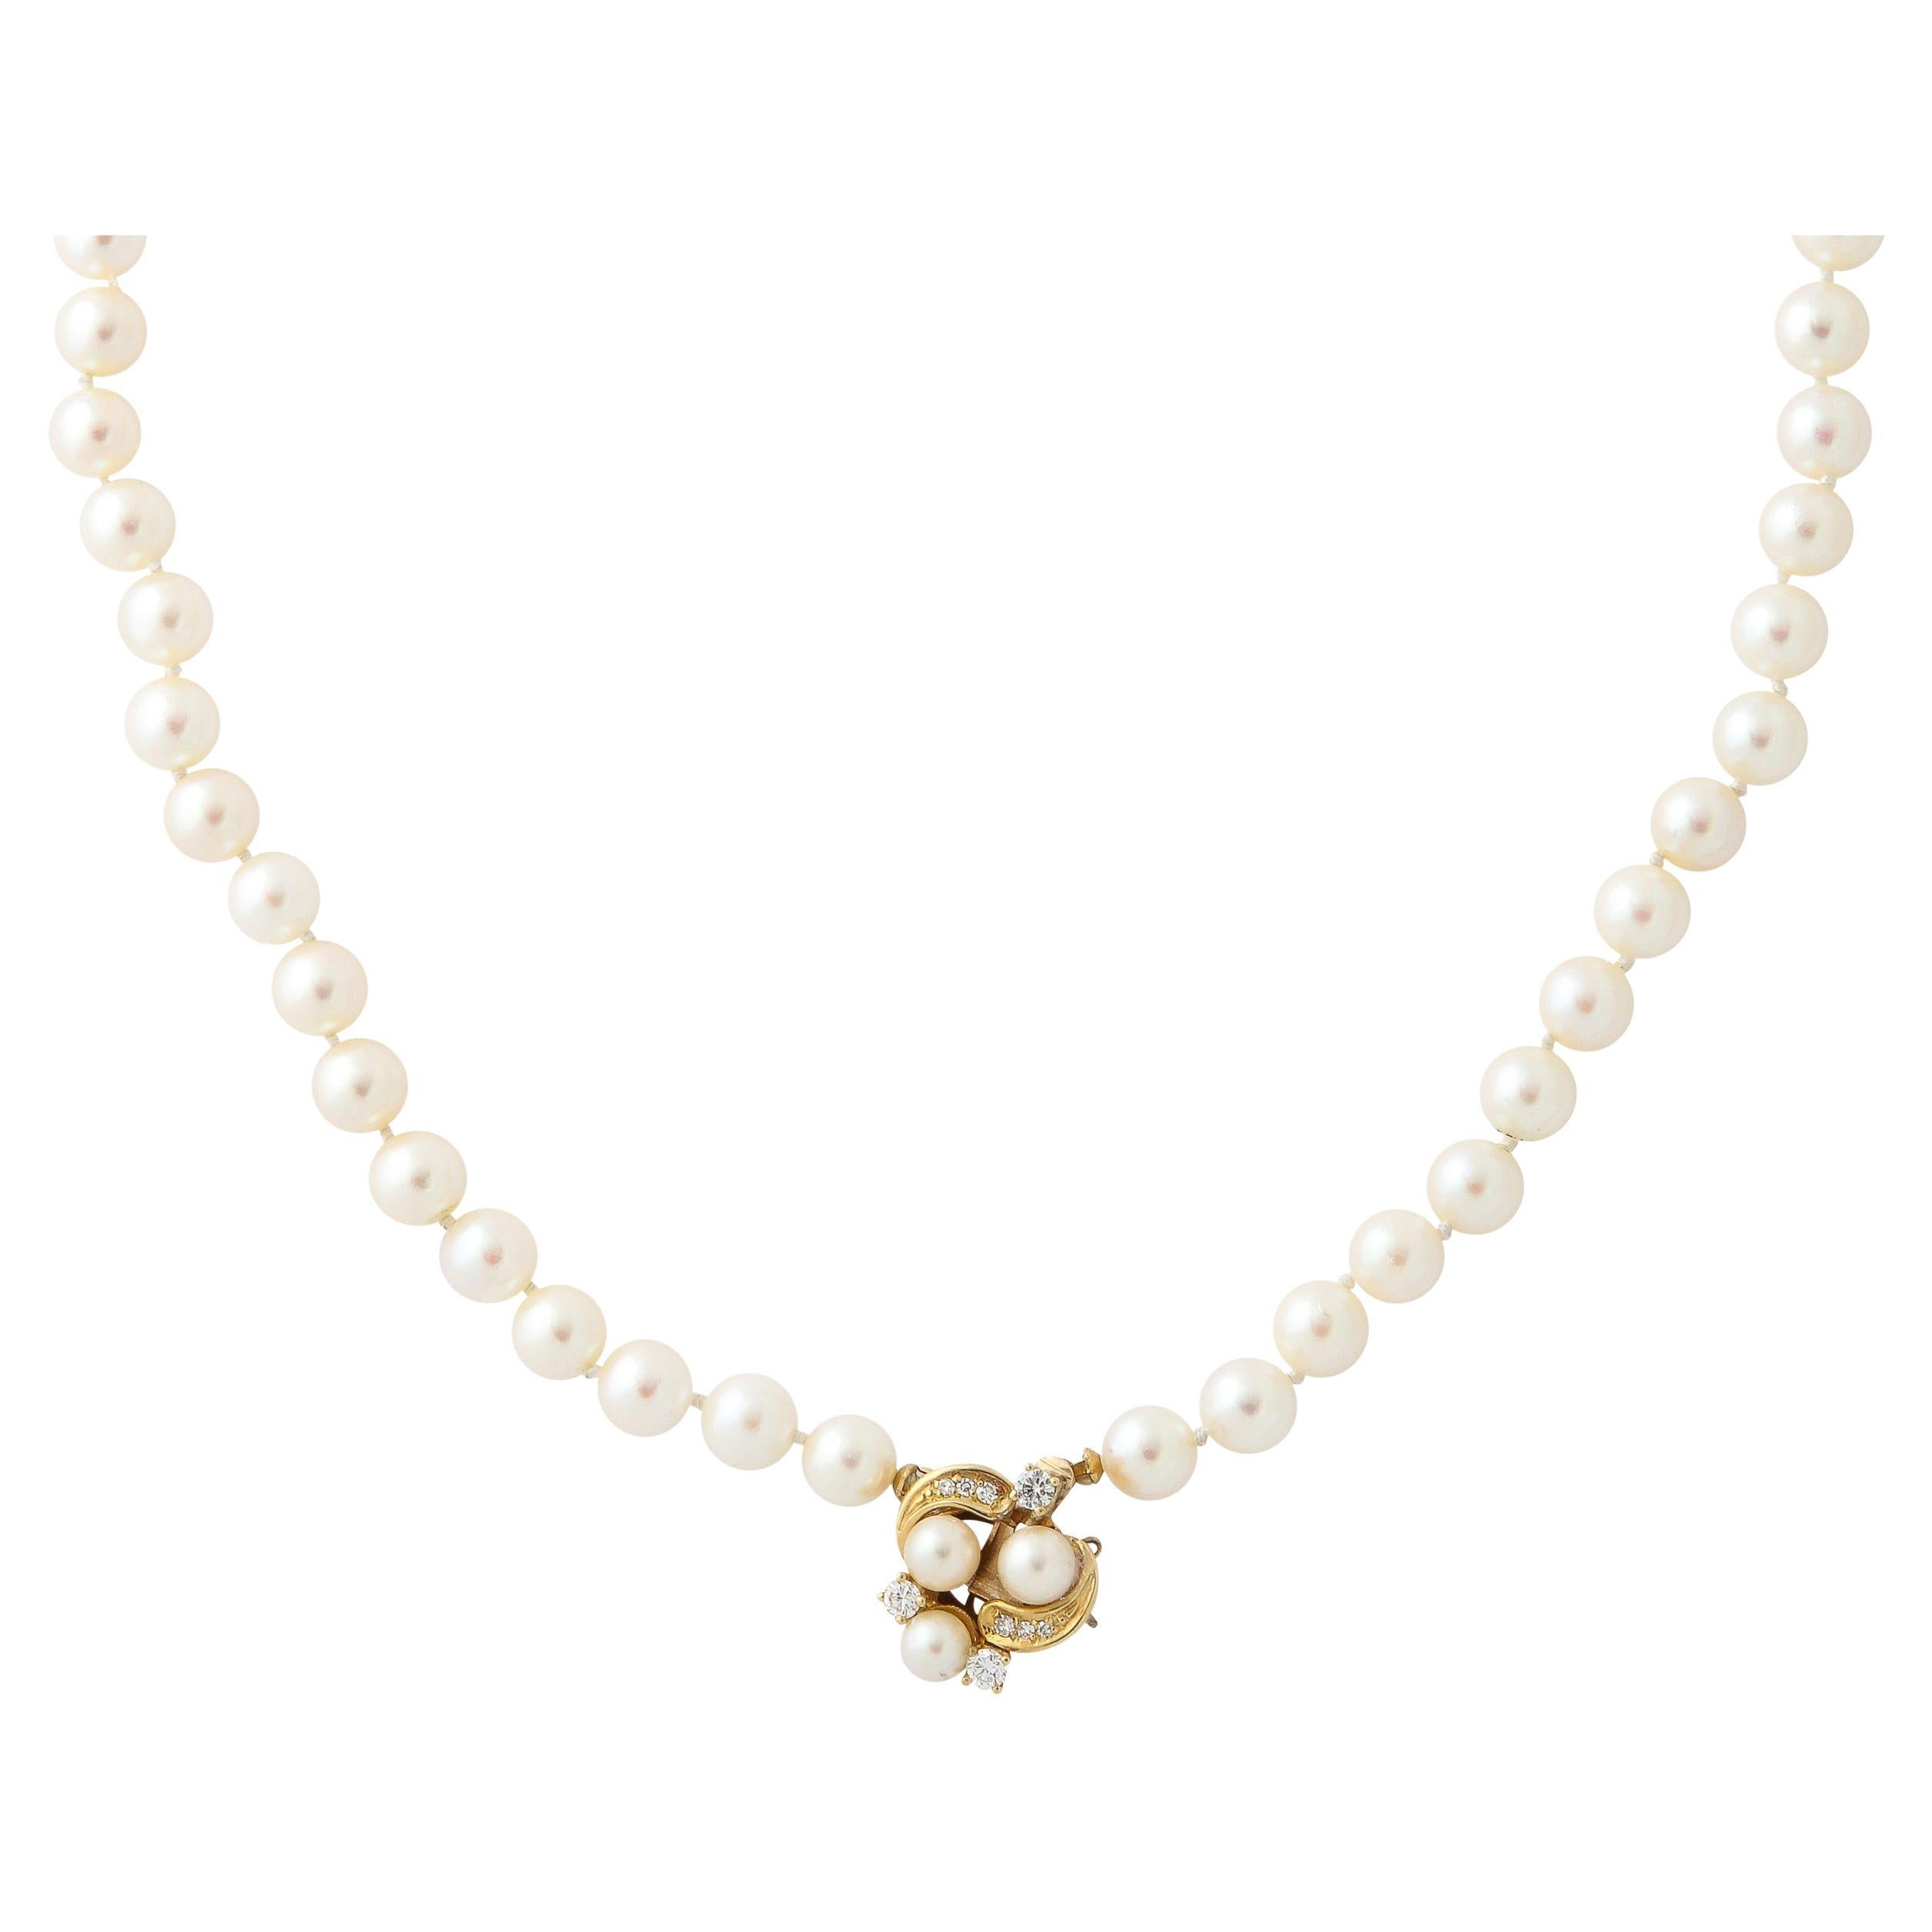 Modernist Pearl Necklace with 14k  Gold , Diamond and Pearl Clasp 